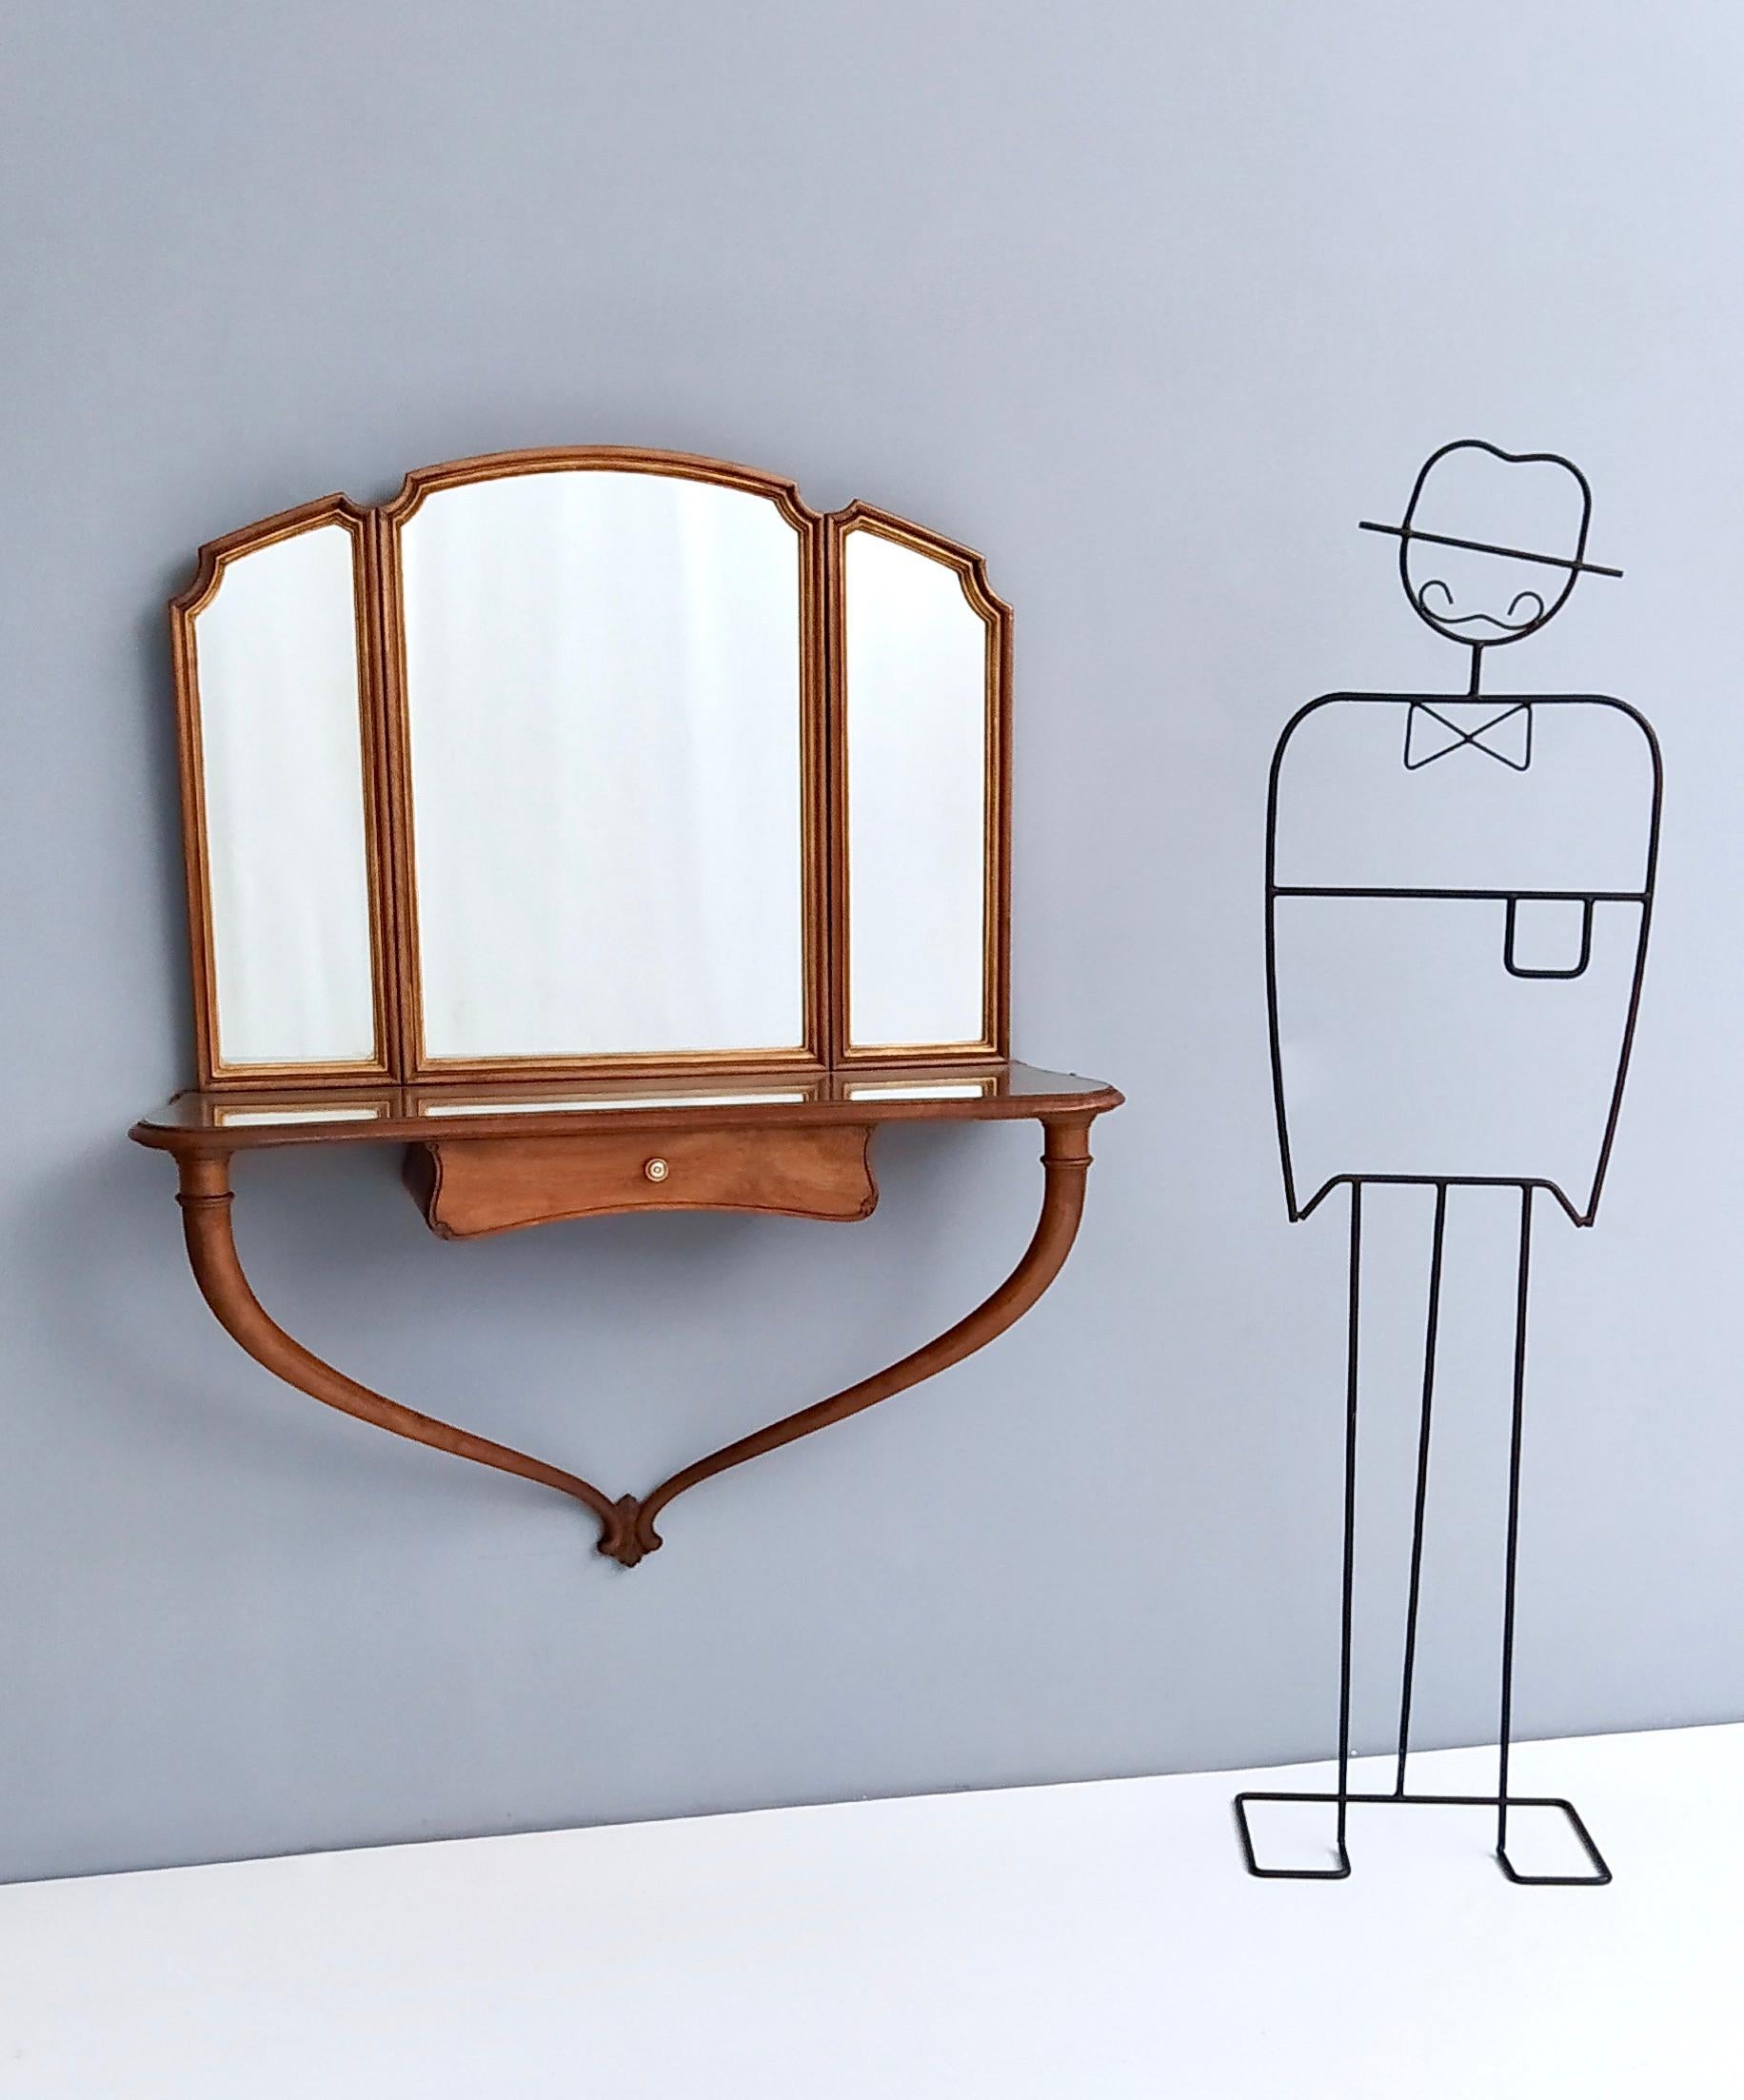 This hallway mirror features a solid walnut frame with gold lacquered details. 
The lateral sections of the mirror are adjustable.
The console table is in solid walnut and features a mahogany drawer with a brass handle and a glass top. 
This is a